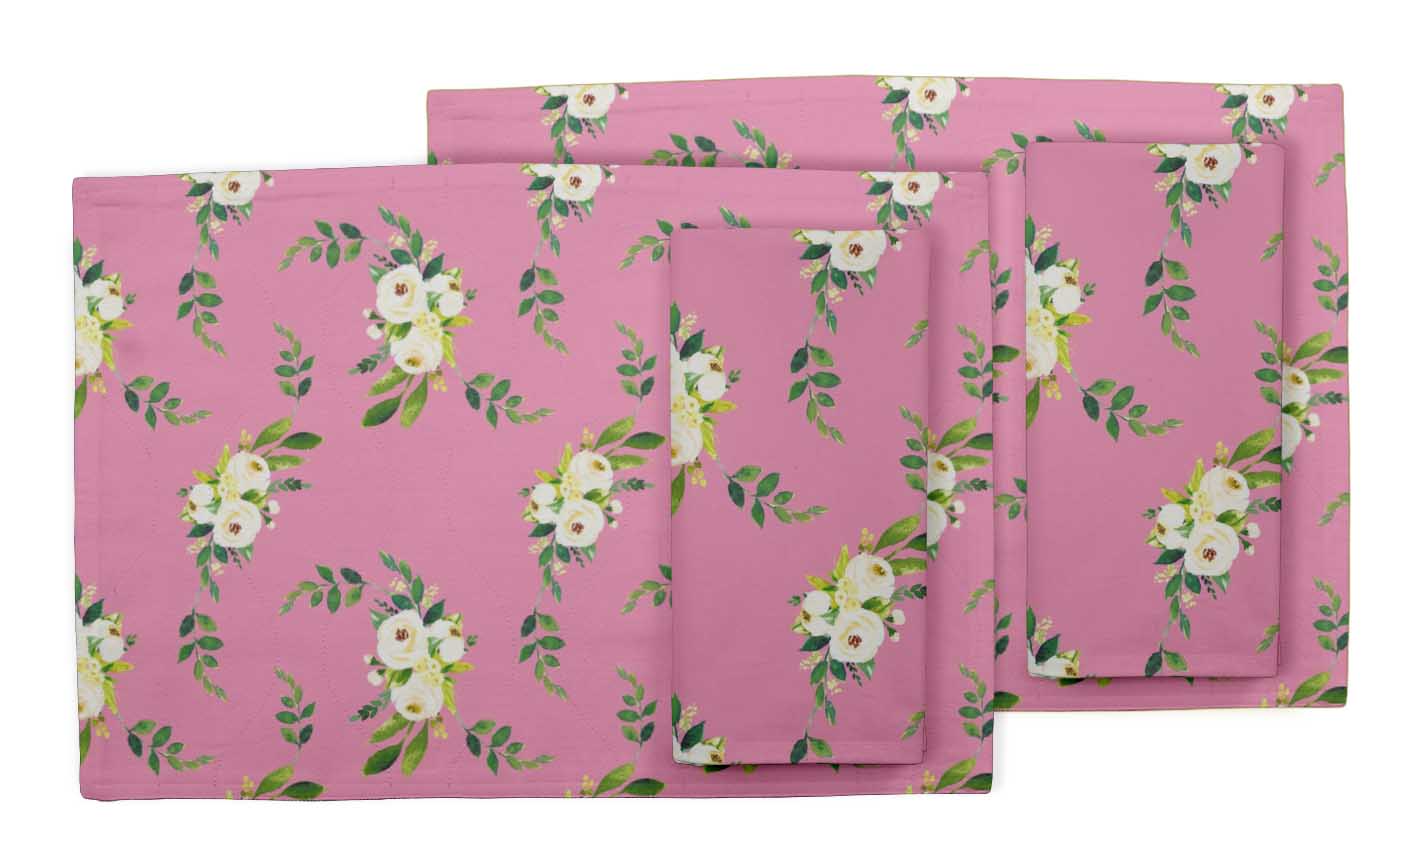 Details about   S4Sassy Leaves & Cardamine Floral Room Tablemats With Napkins set-FL-930B 